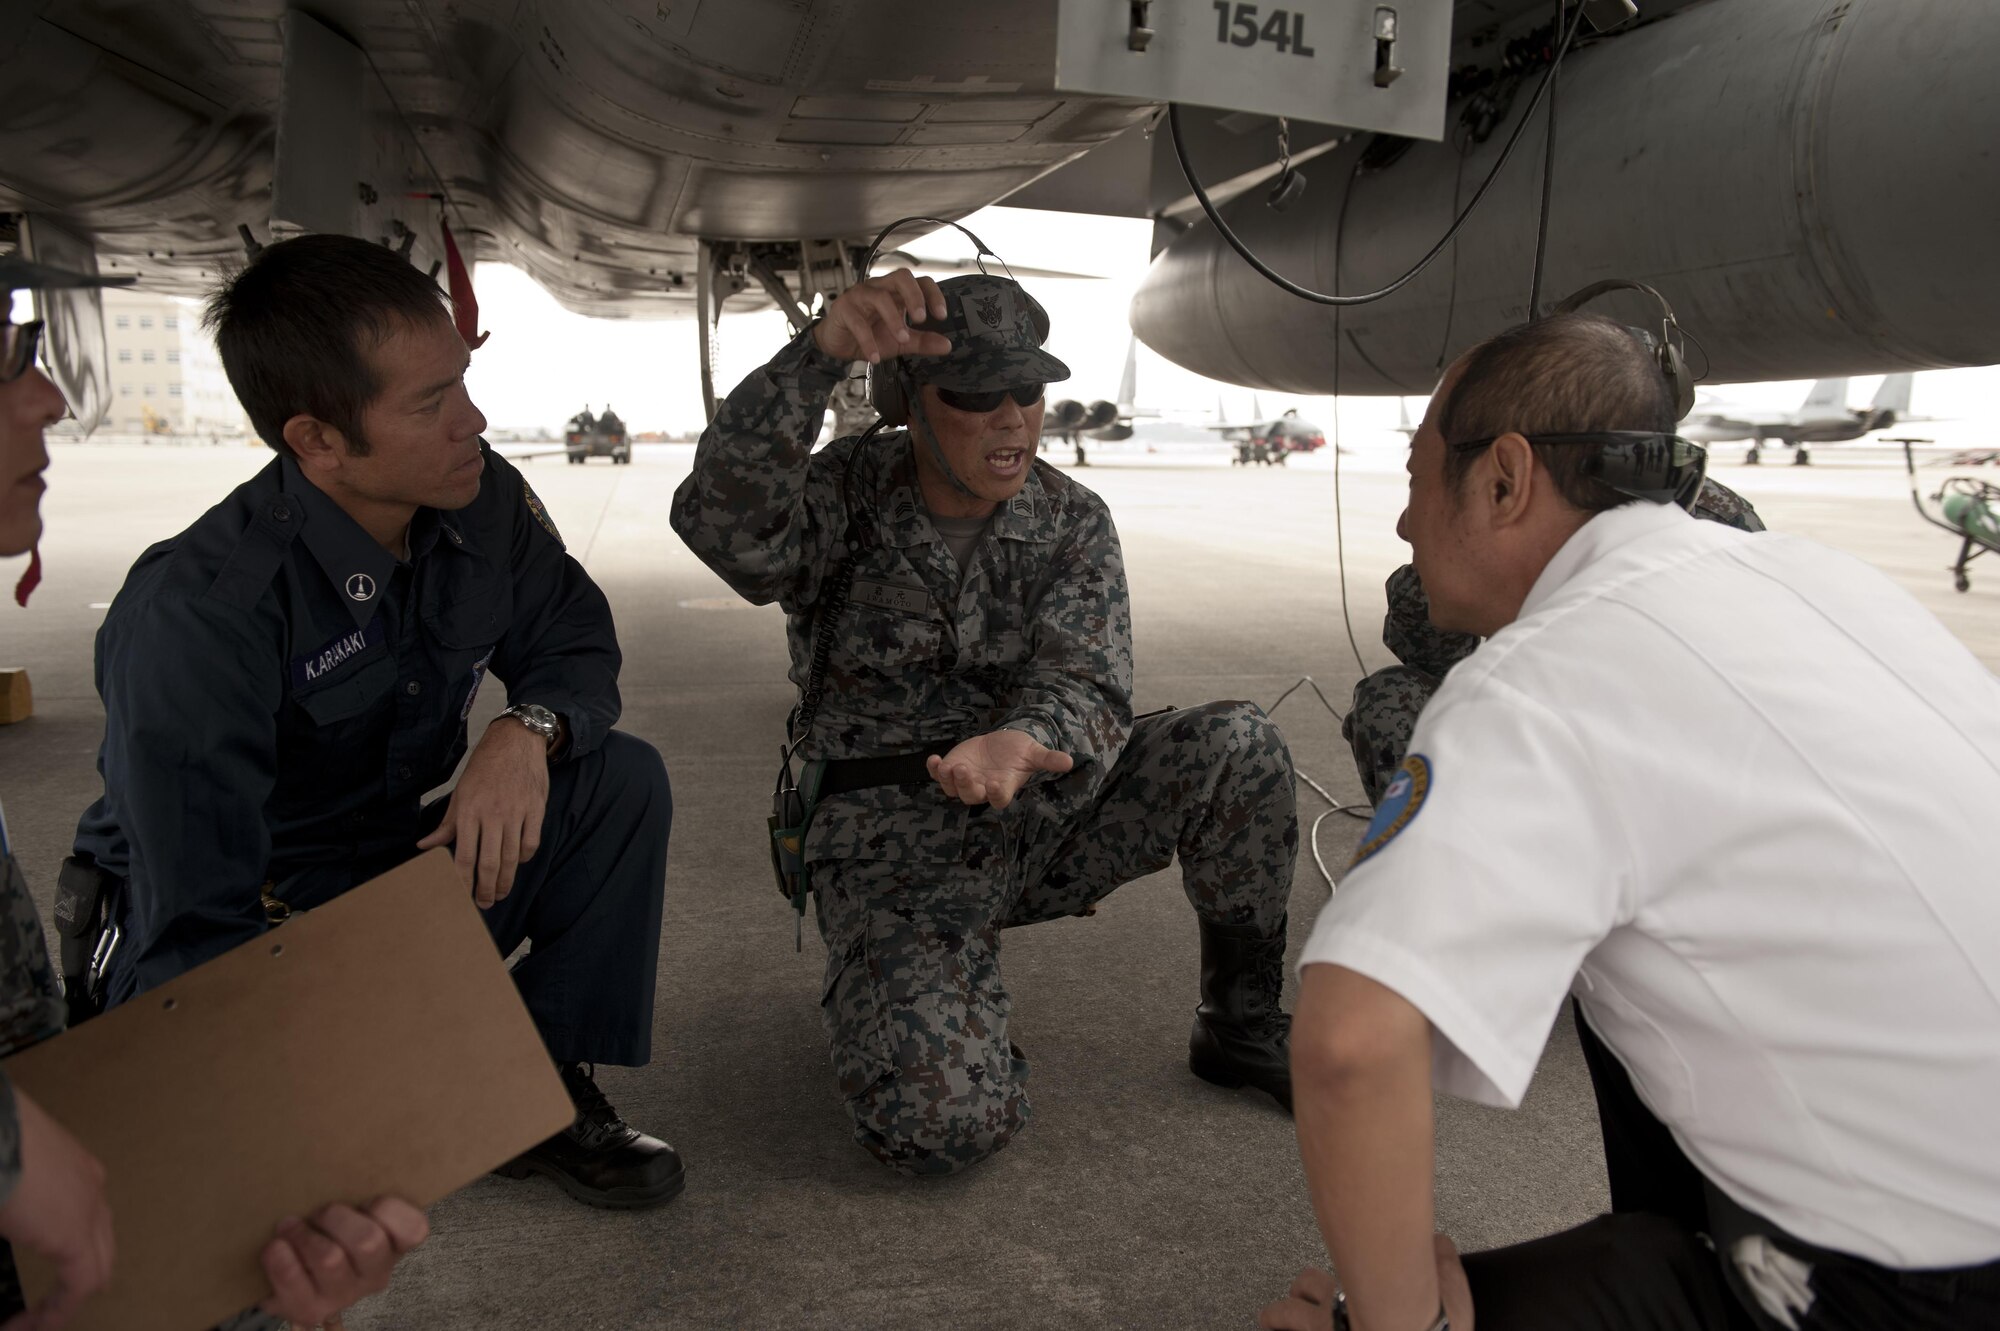 Japan Air Self-Defense Force Master Sgt. Seiji Iwamoto, 9th Wing flight line boss, U.S. Air Force Koichiro Arakaki, 18th Civil Engineer Squadron firefighter, and Mitsuo Yamaguchi, 18th CES fire training officer, discuss protocols for handing fire emergency situations March 15, 2016, at Naha Air Base, Japan. JASDF aircrews and 18th CES Firefighters conducted fire training to enhance interoperability in the event of inflight emergencies. (U.S. Air Force photo by Senior Airman Peter Reft)